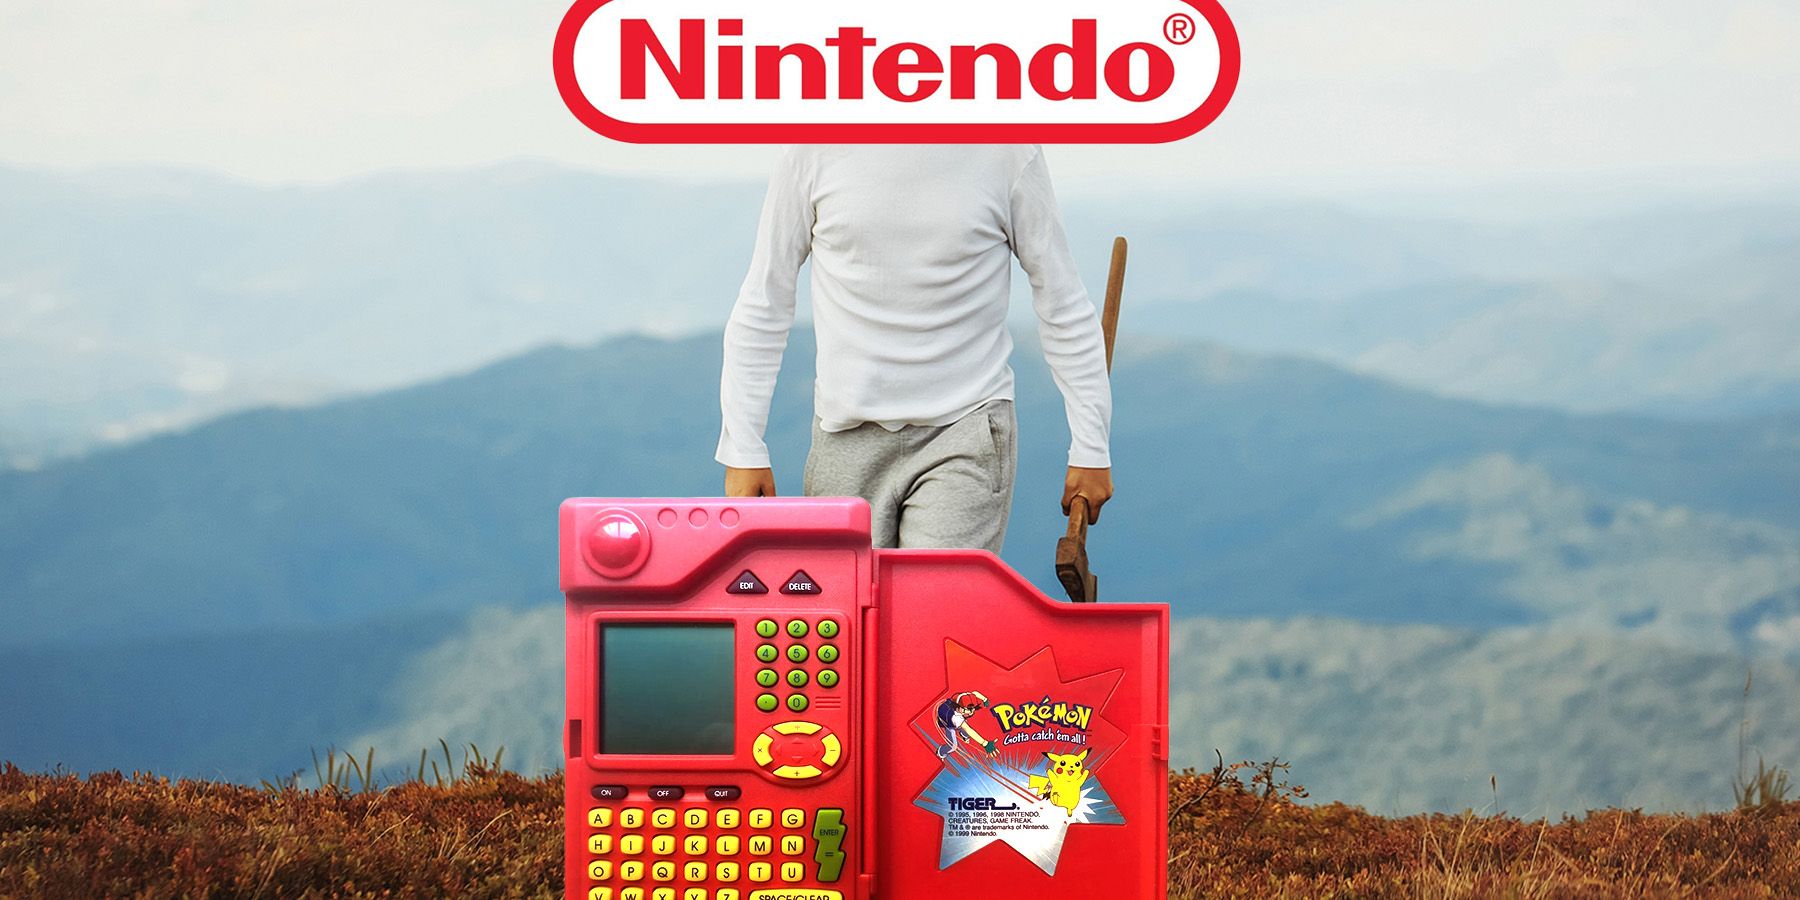 An image of a man with the Nintendo logo over his face and an axe in his hand menacingly approaching the electronic Pokemon Pokedex toy.